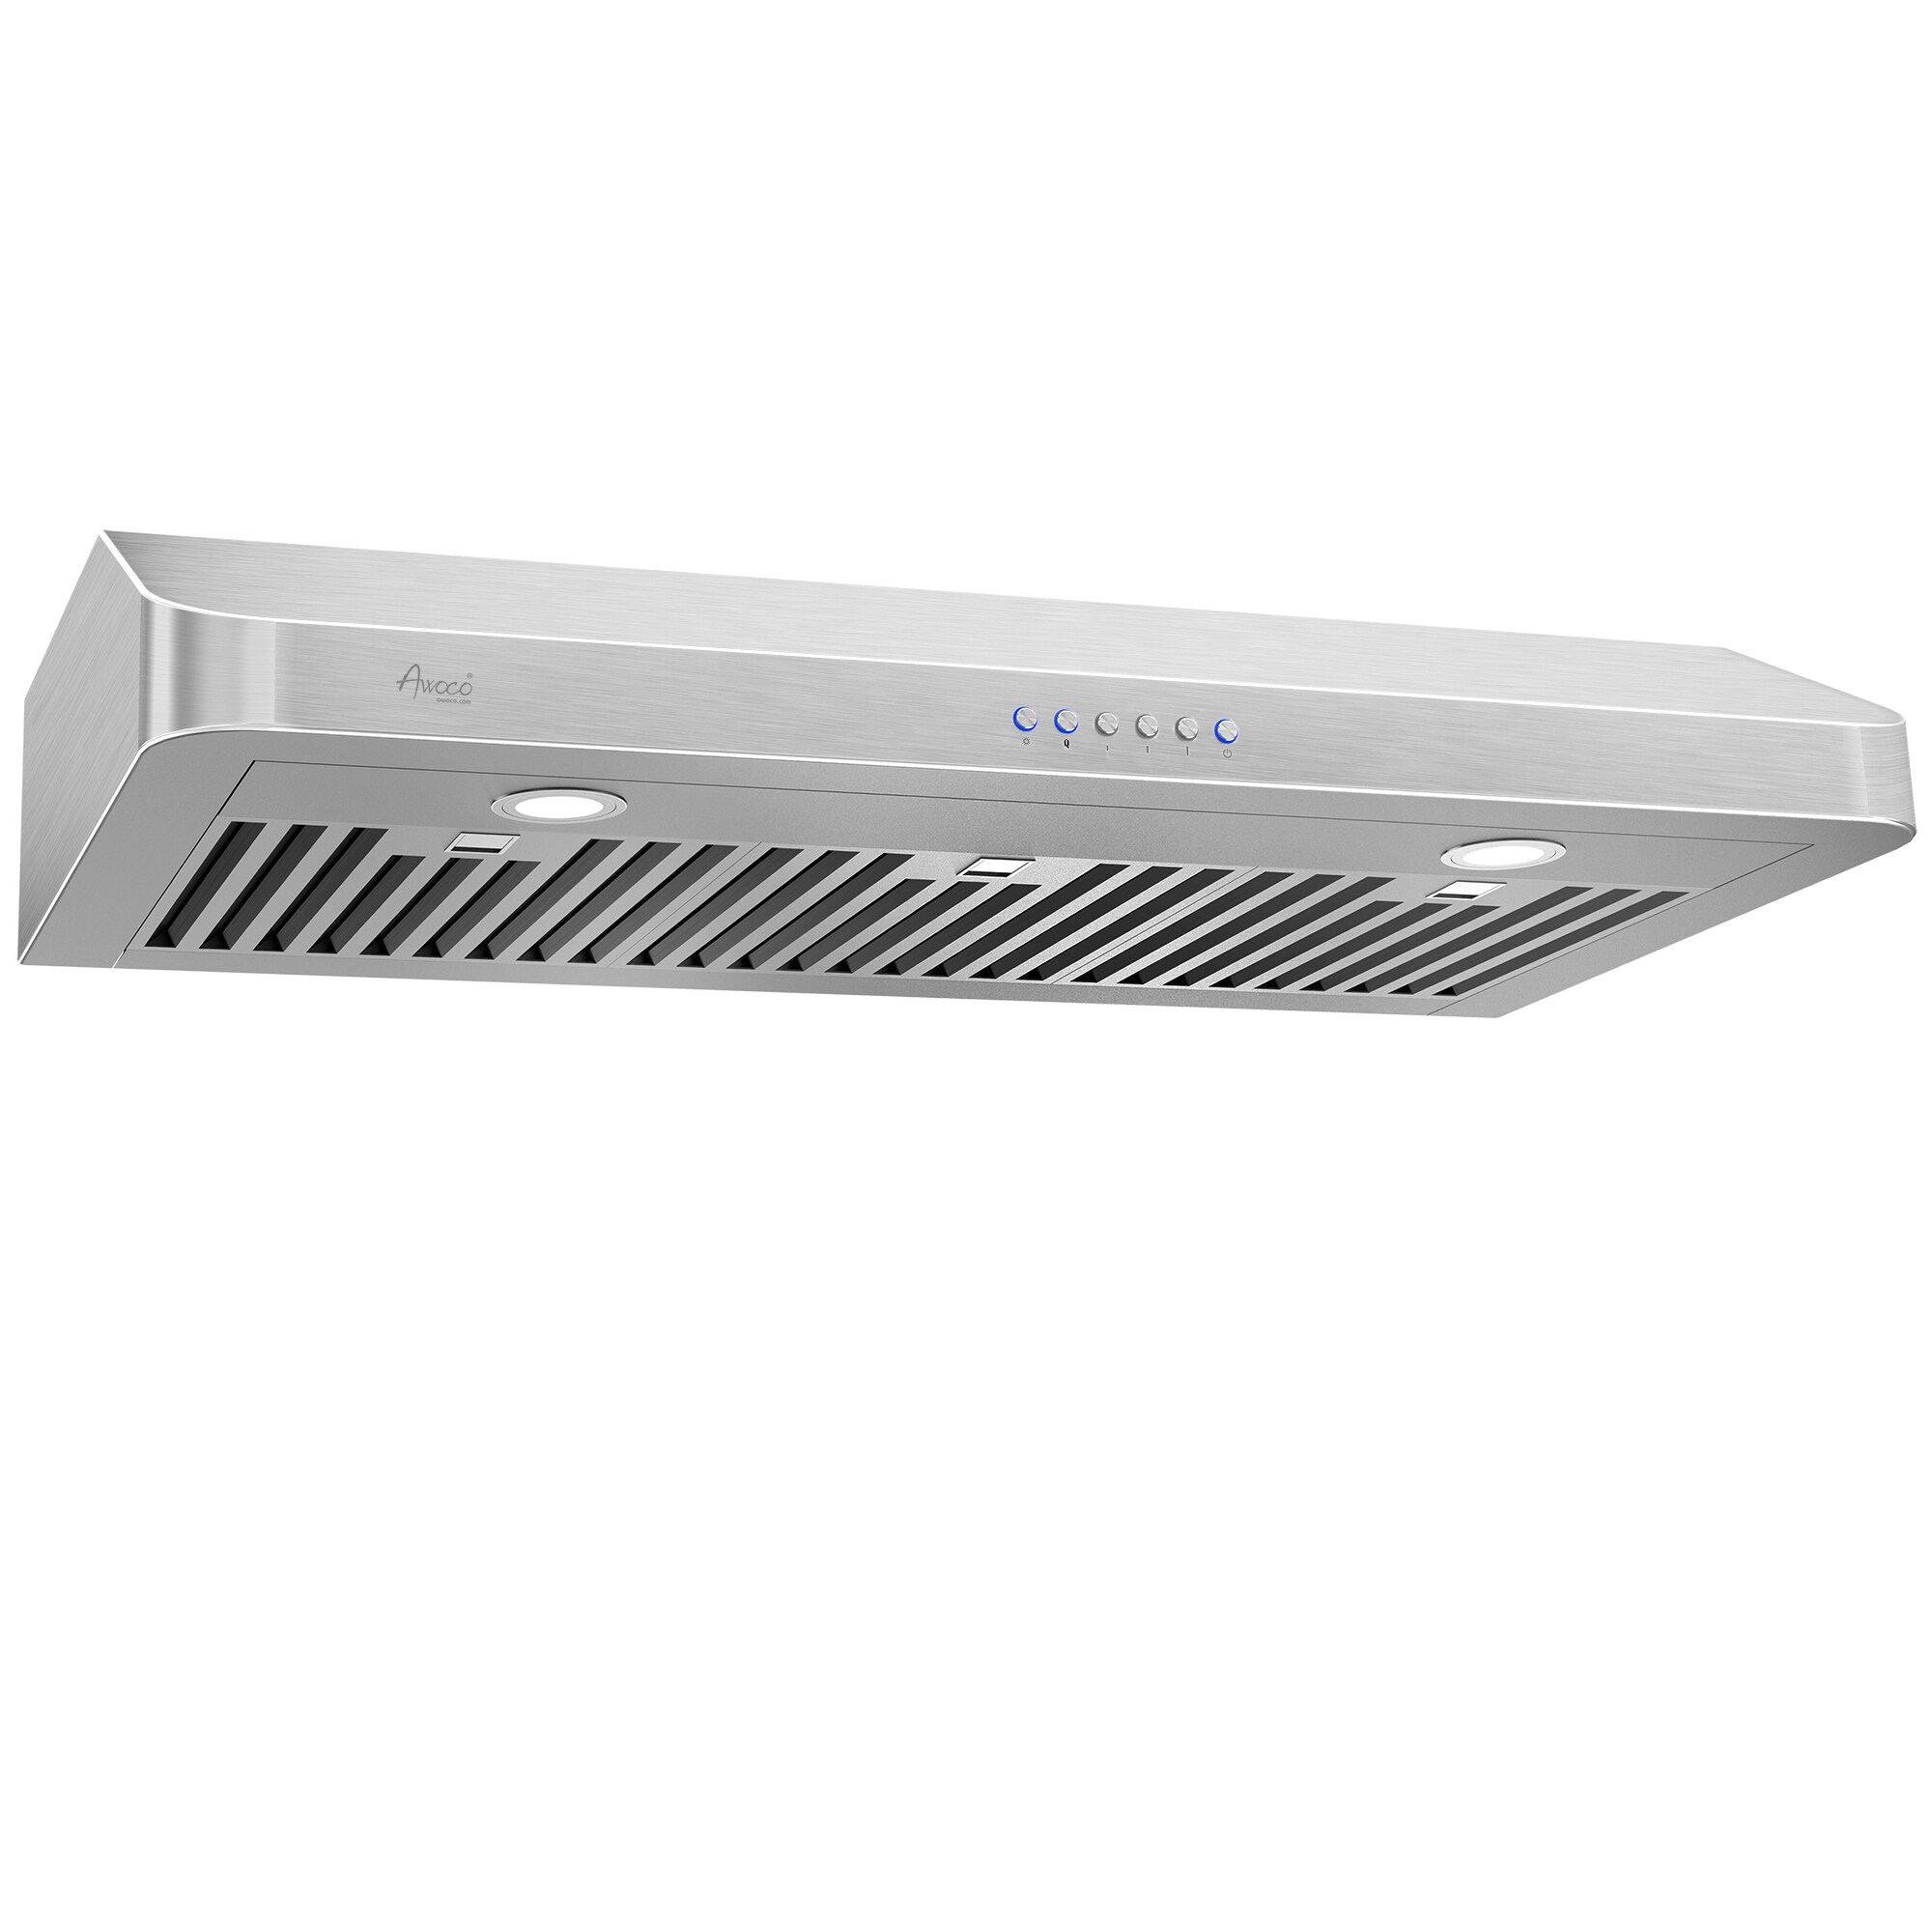 Awoco 30-in Undercabinet Ducted Stainless Steel Range Hood in the 